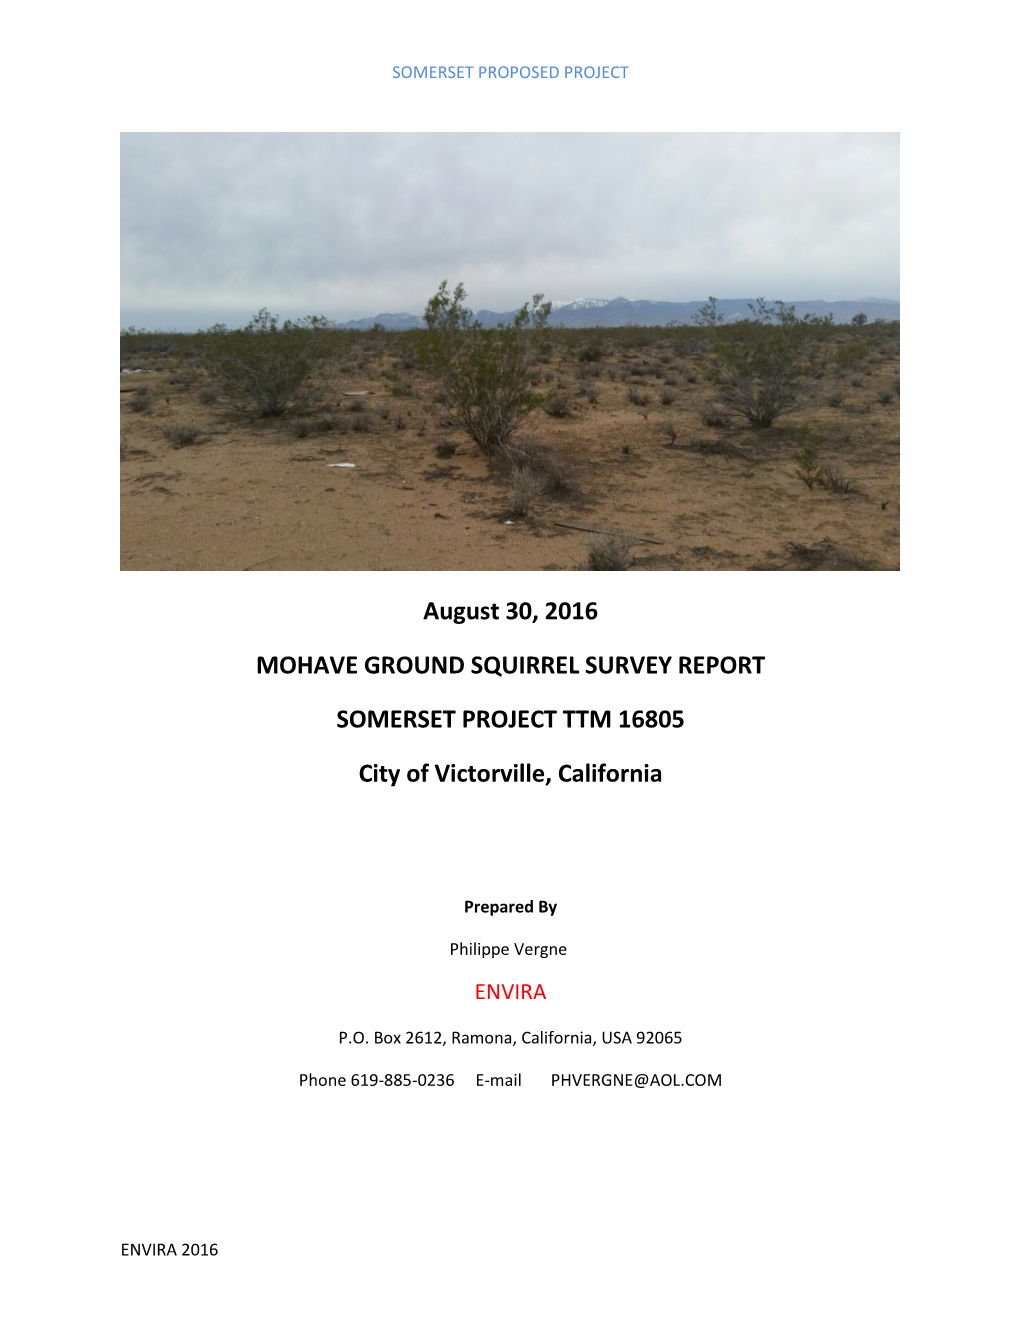 August 30, 2016 MOHAVE GROUND SQUIRREL SURVEY REPORT